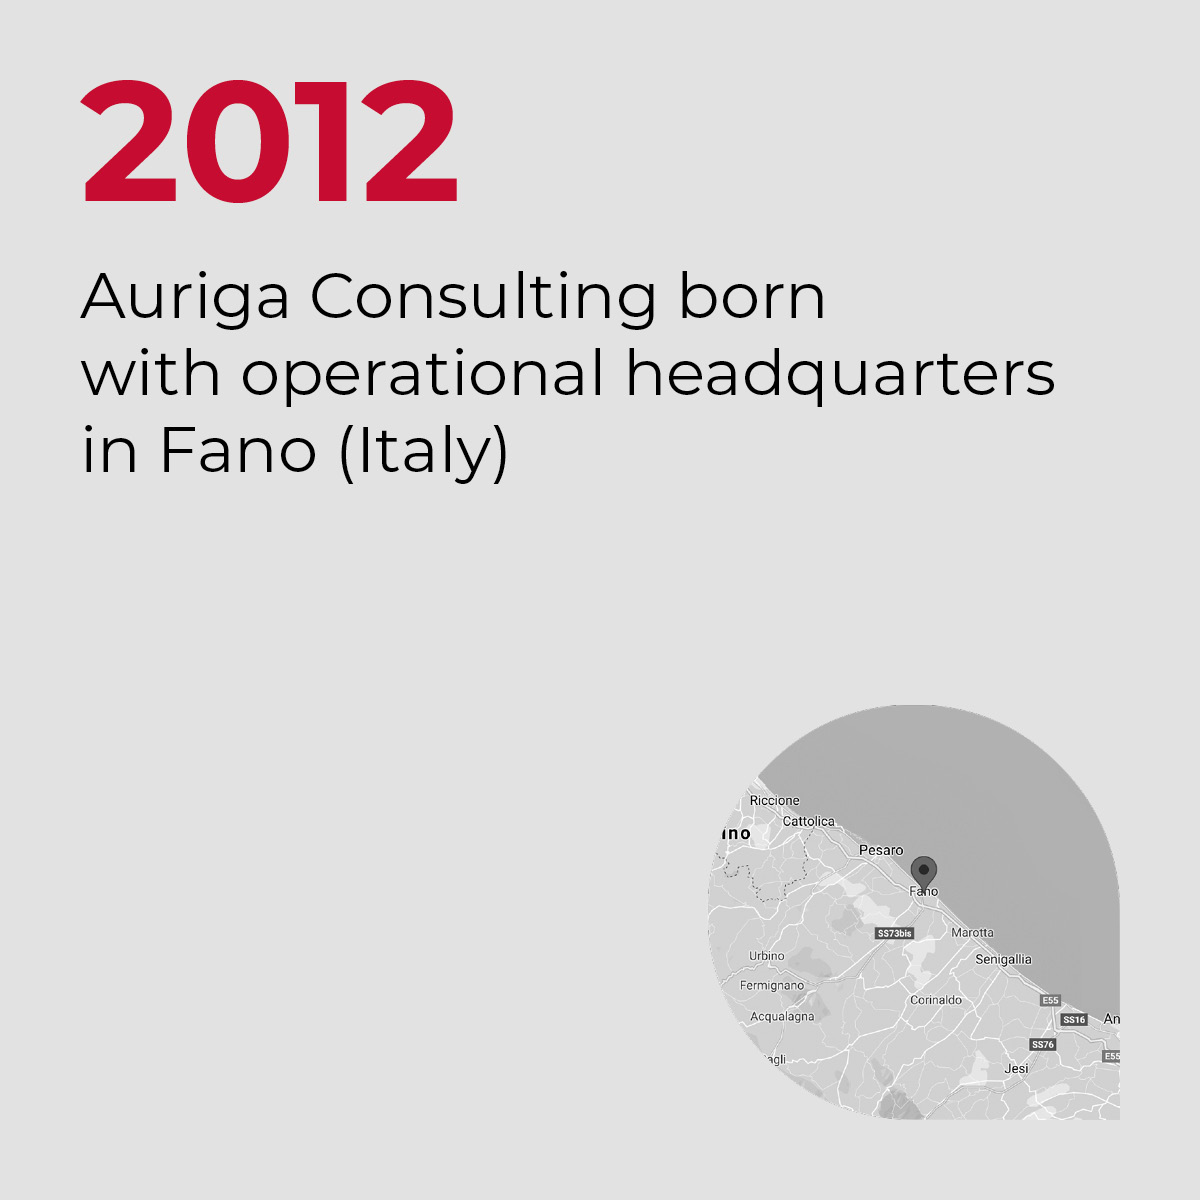 2012, Auriga Consulting born with operational headquarters in Fano (Italy)